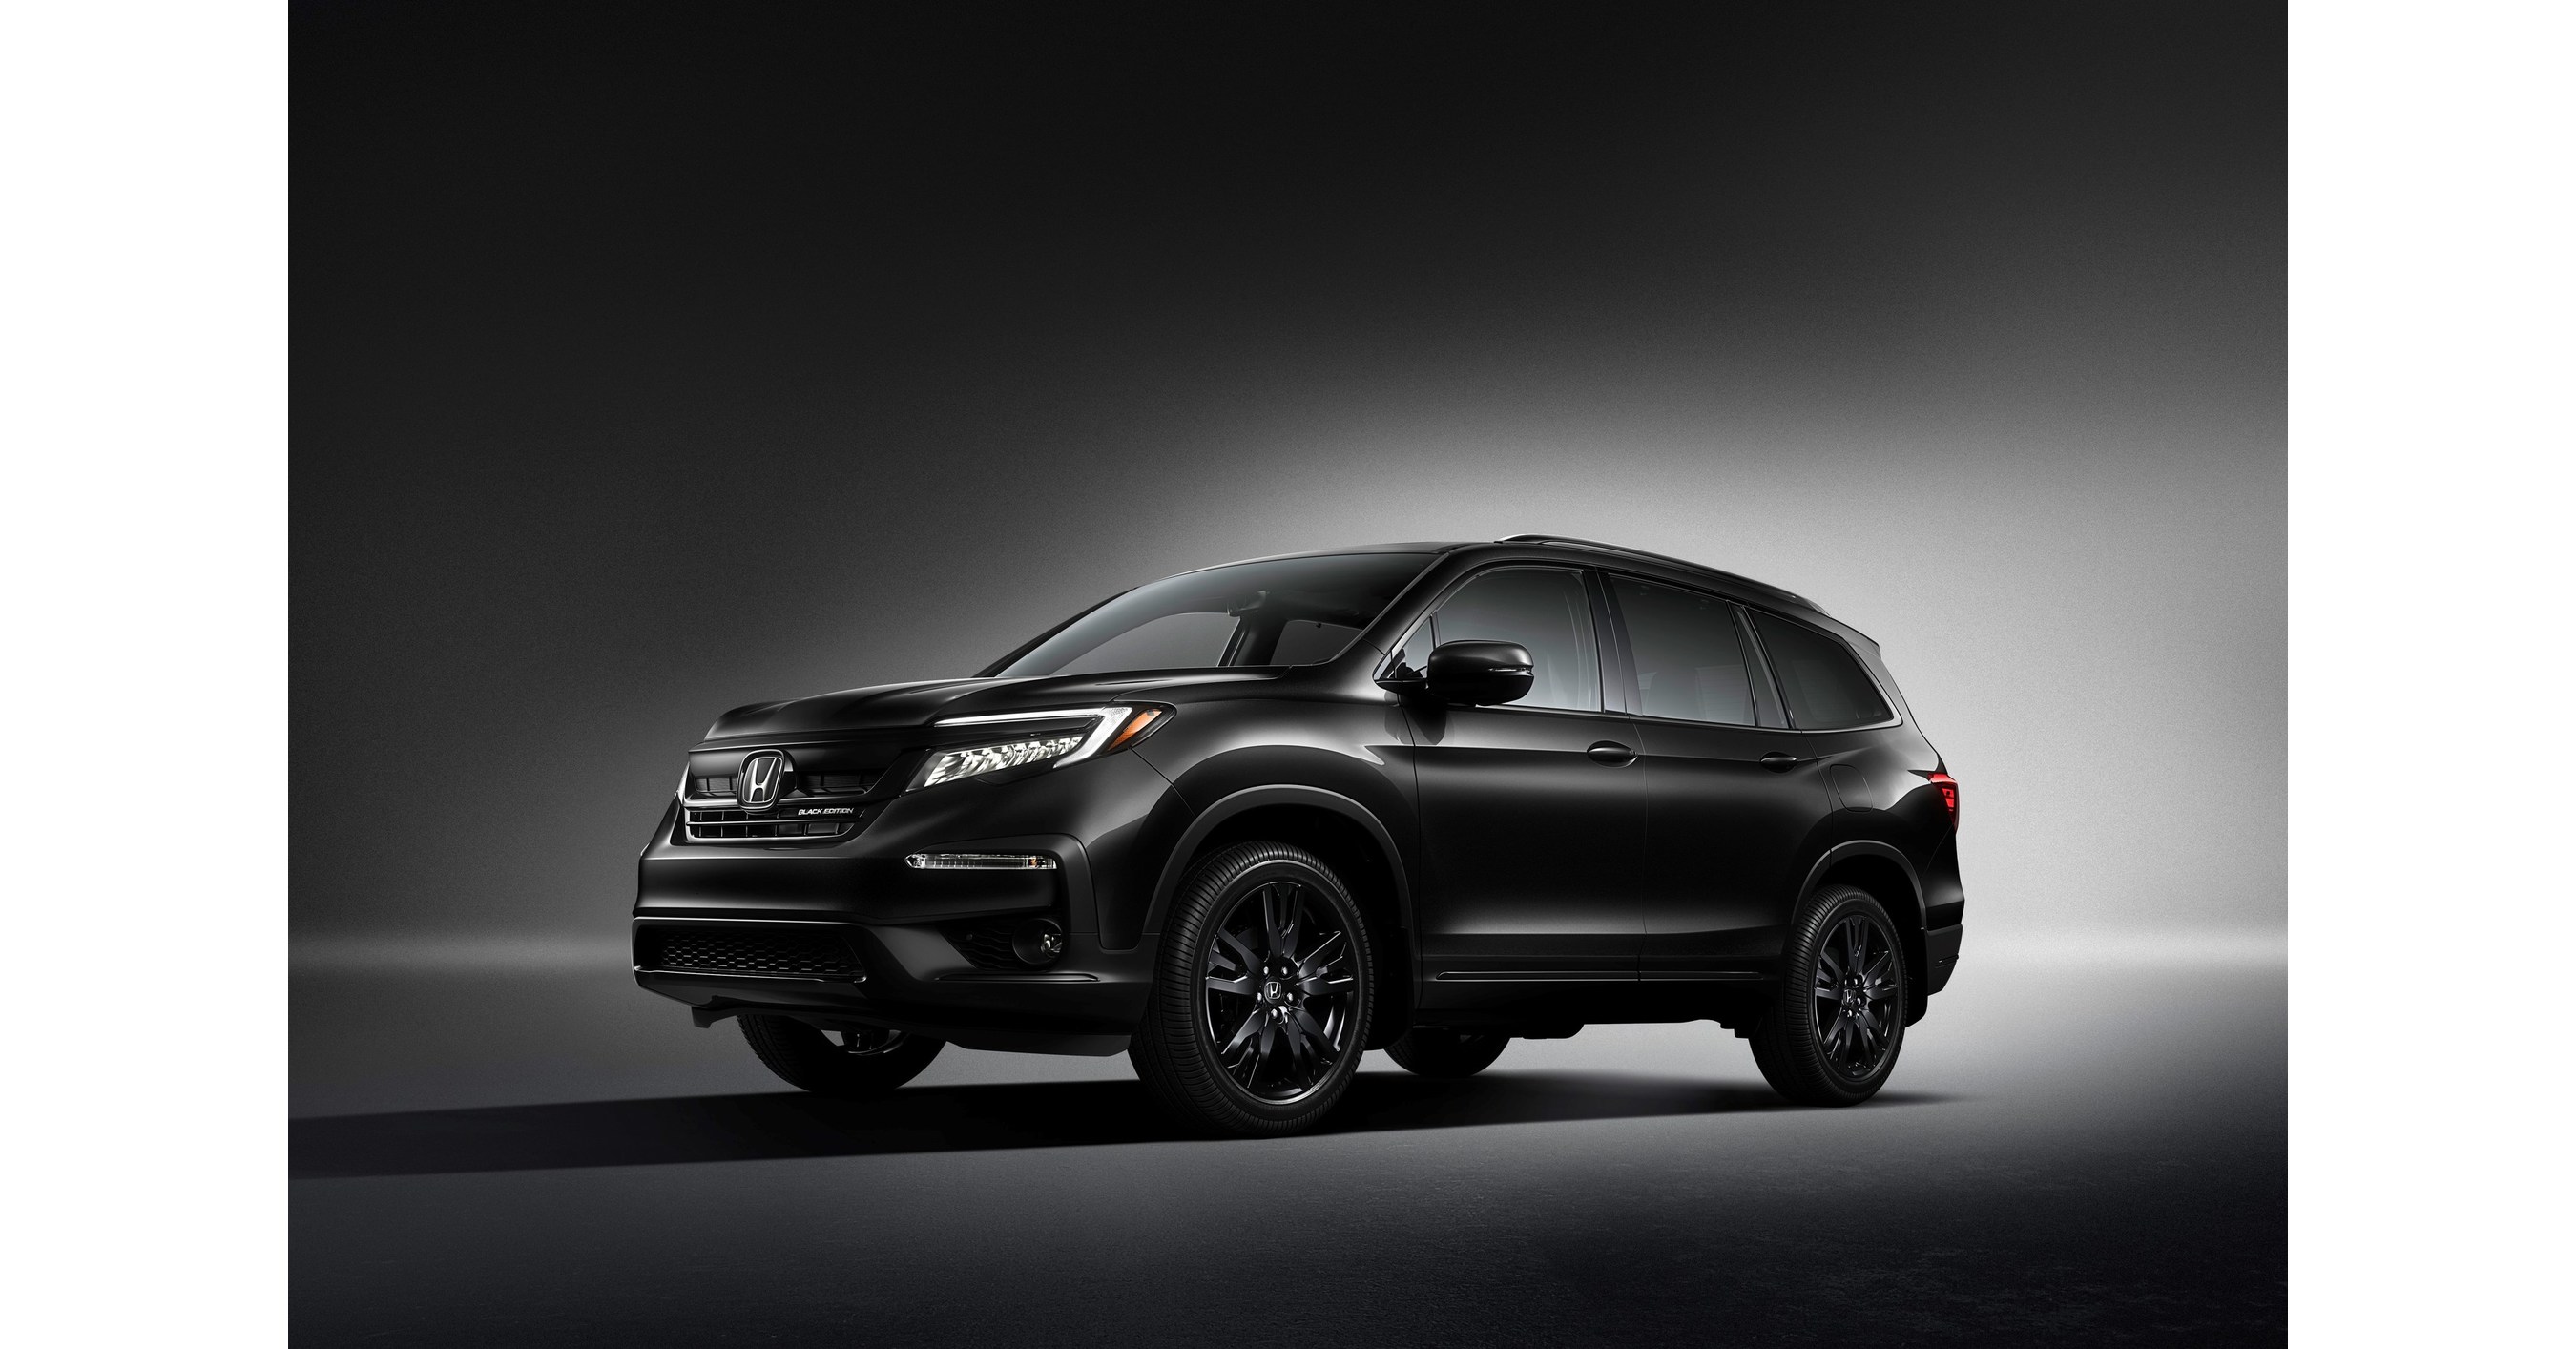 2020 Honda Pilot Launches with New Line-Topping Black Edition Trim